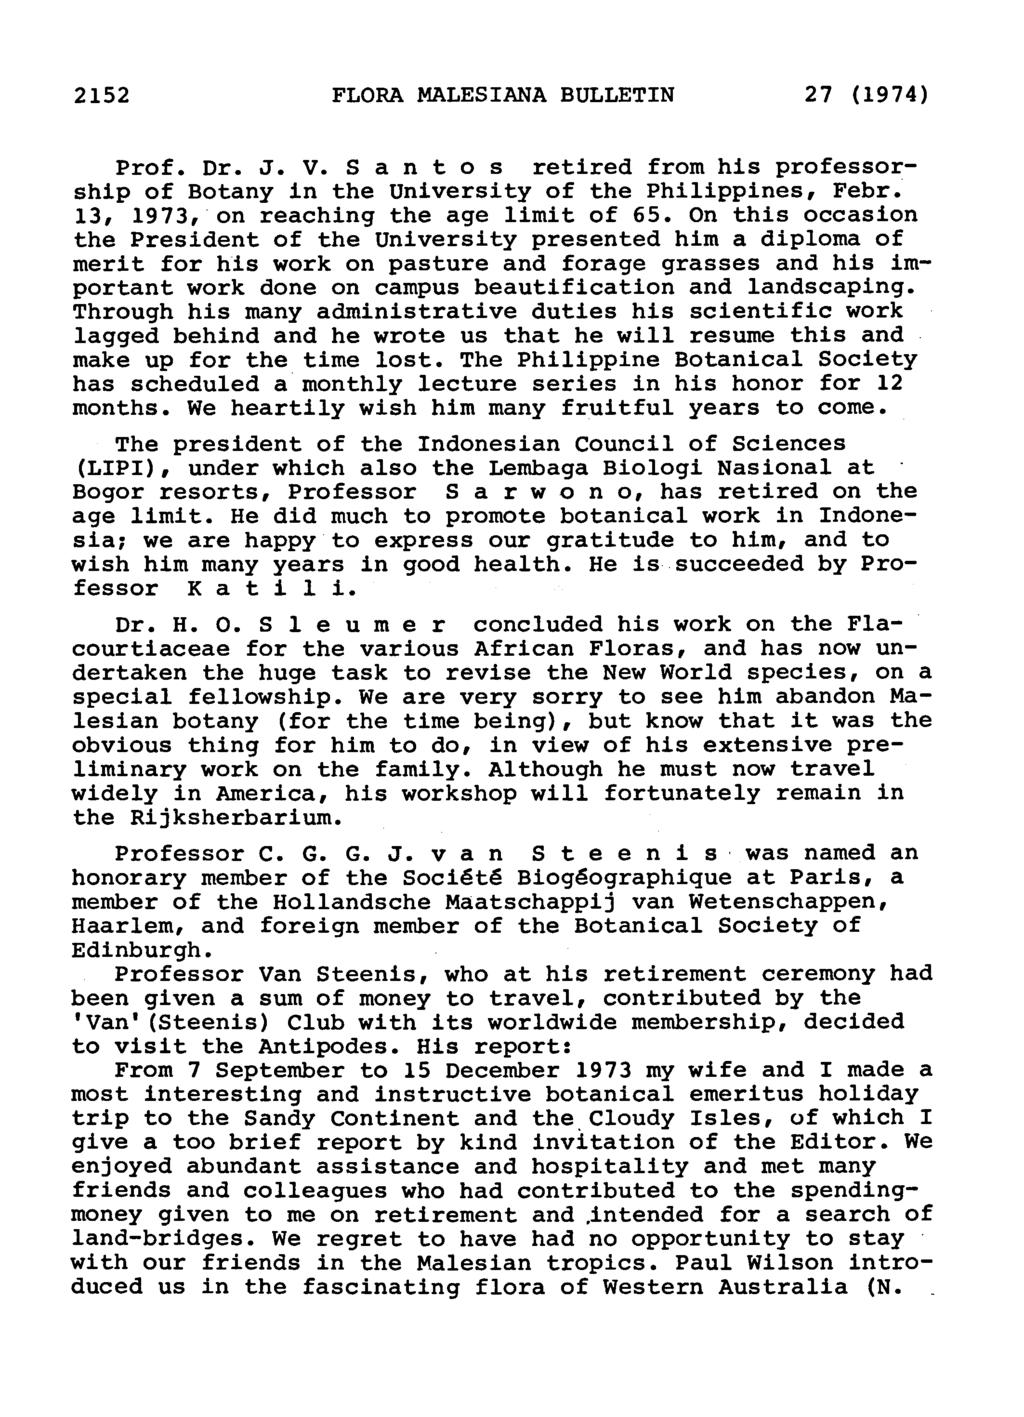 2152 FLORA MALESIANA BULLETIN 27 (1974) Prof. Dr. J. V. S a nt os retired from his professorship of Botany in the University of the Philippines, Febr. 13, 1973, on reaching the age limit of 65.